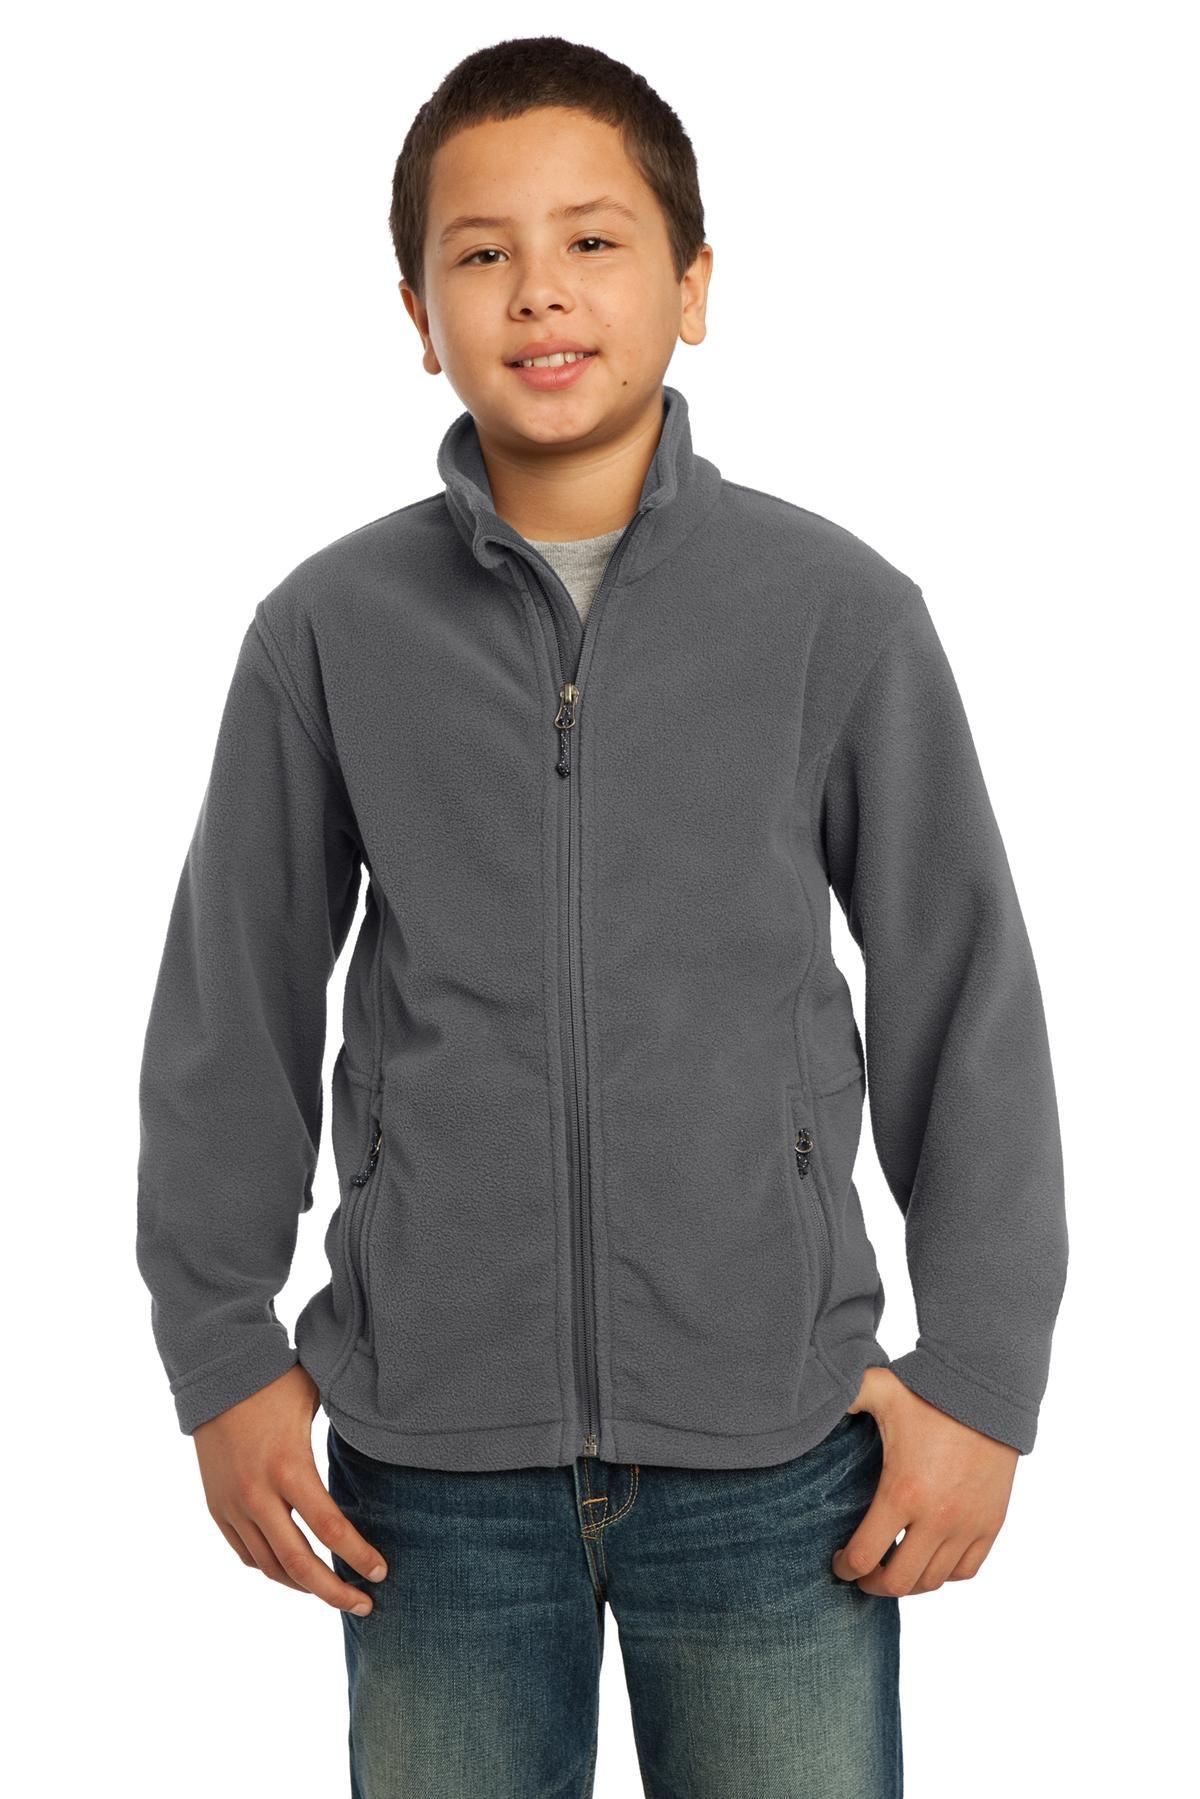 Port Authority Youth Value Fleece Jacket. Y217 - Dresses Max